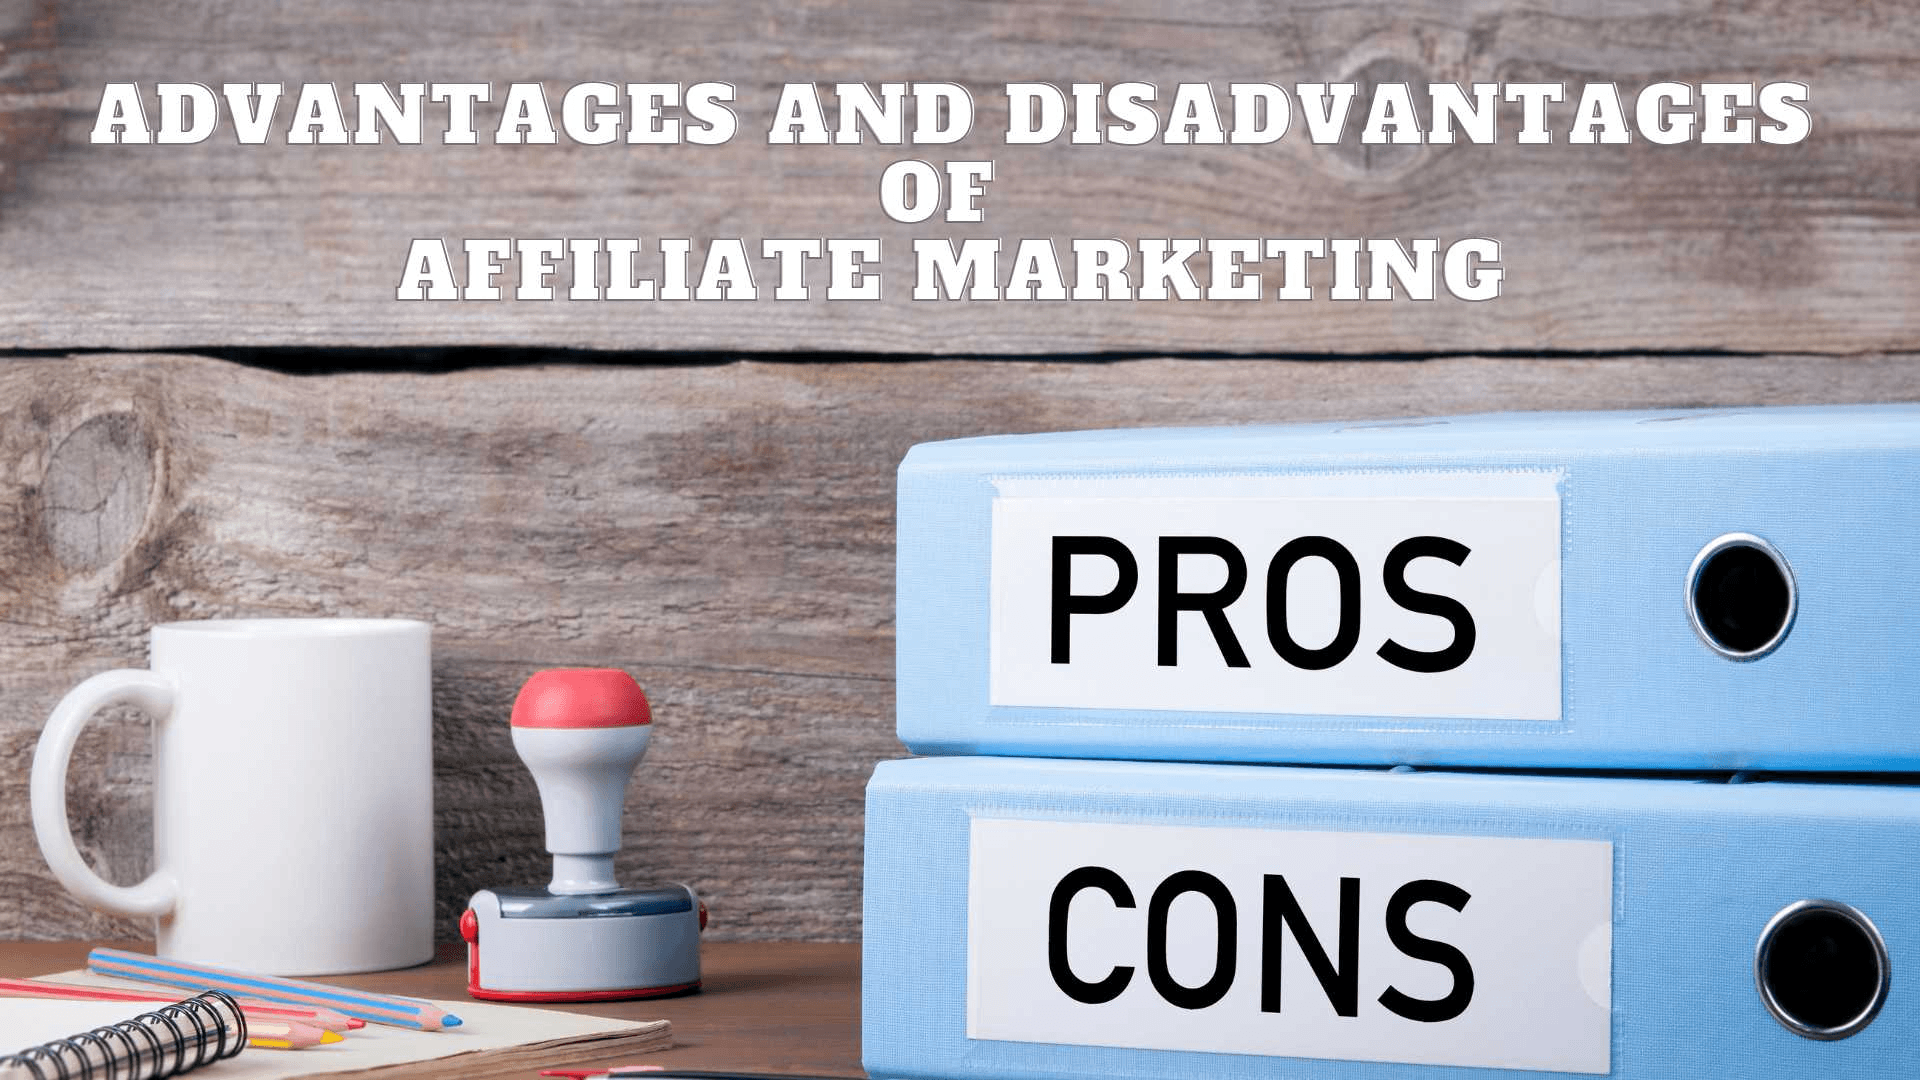 Pros and cons of affiliate marketing